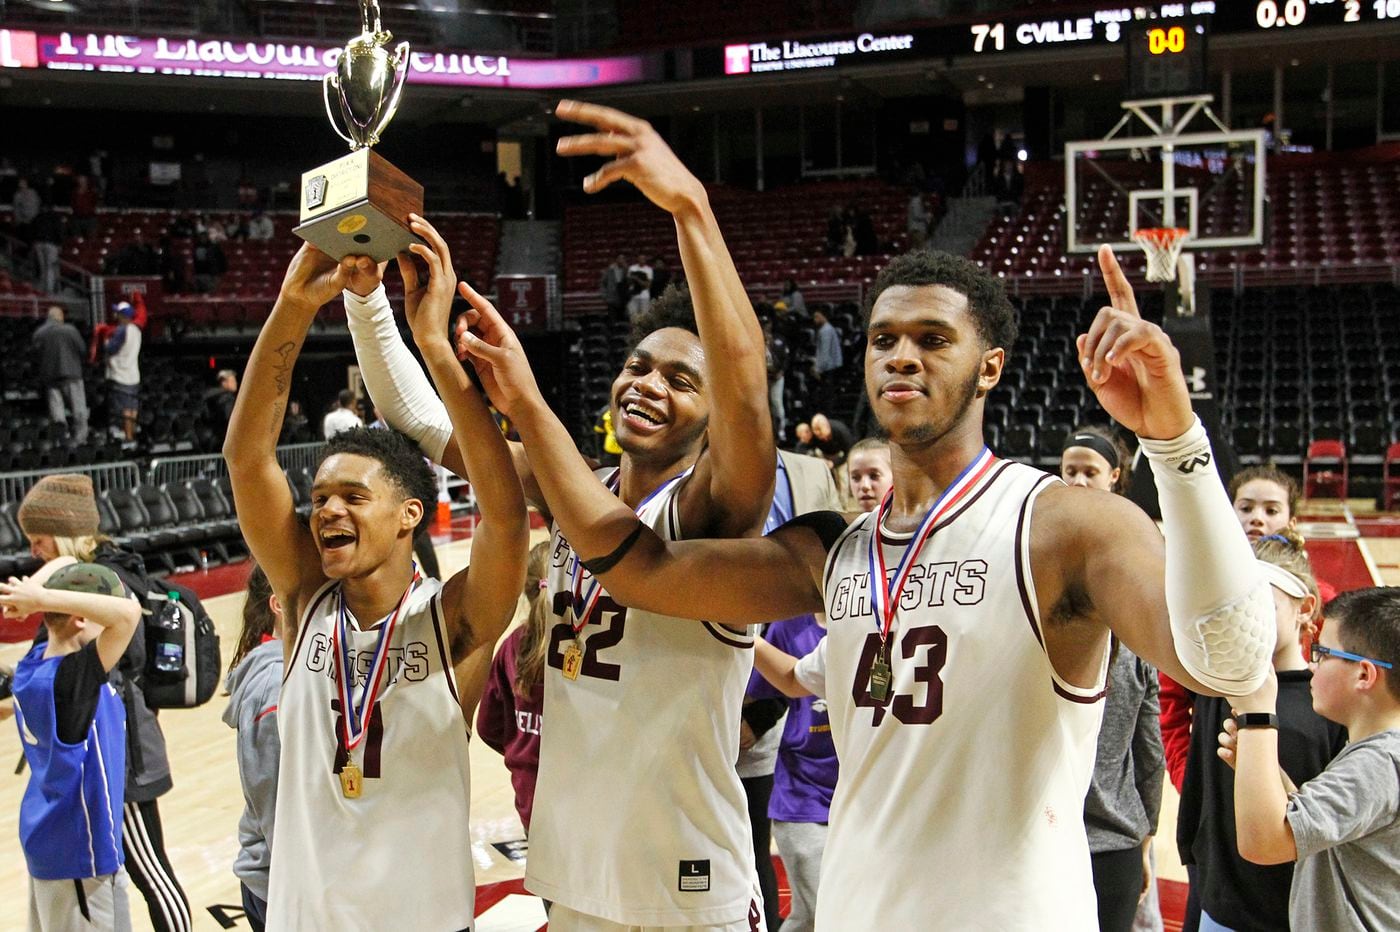 Led by Eric Dixon, Abington beats Coatesville to win third straight District 1 6A basketball championship